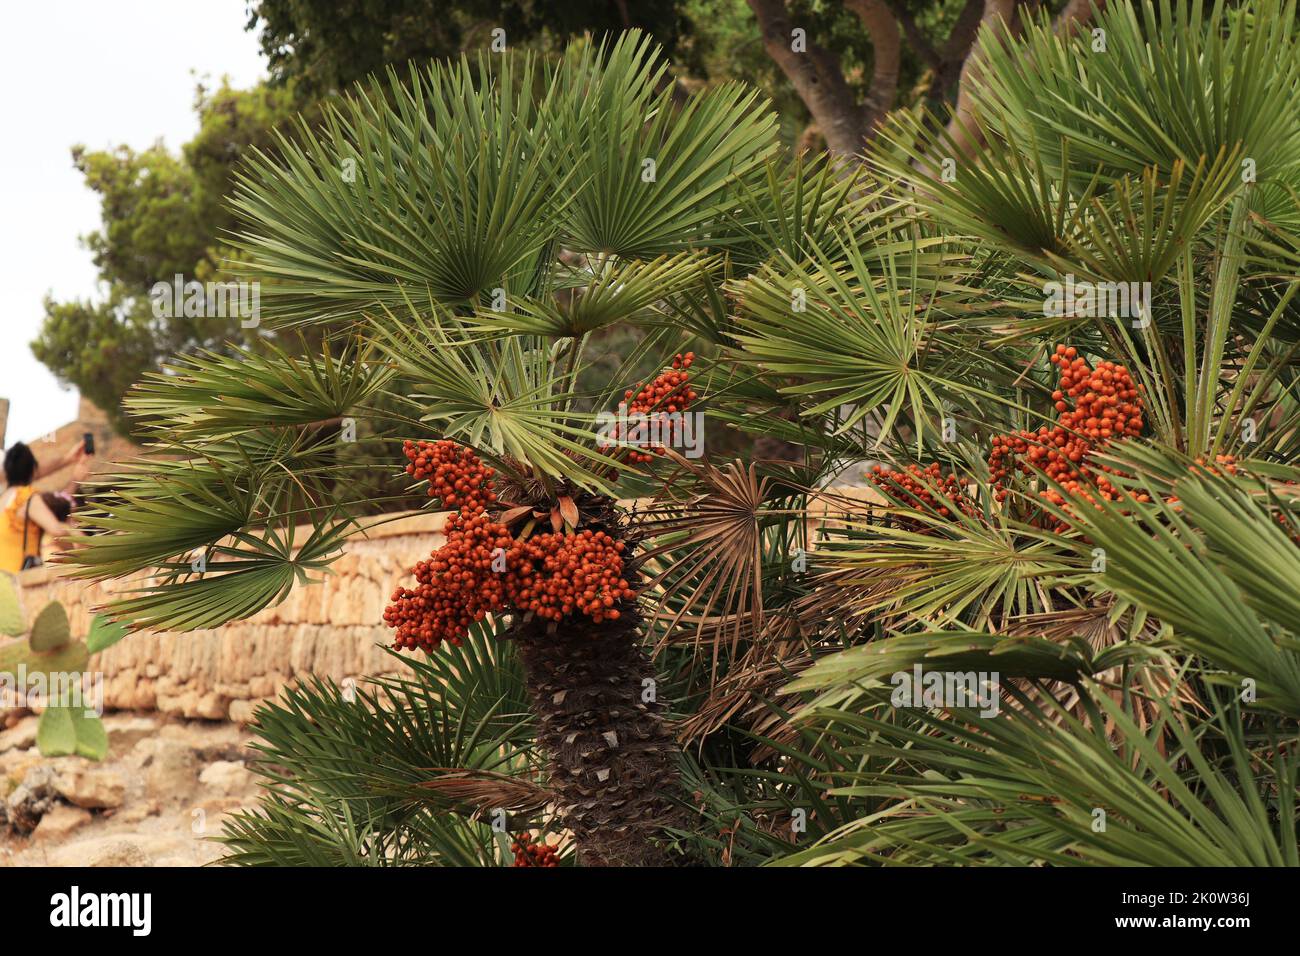 Mediterranean Fan Palm. Leaves and fruit of Chamaerops humilis palms. Stock Photo